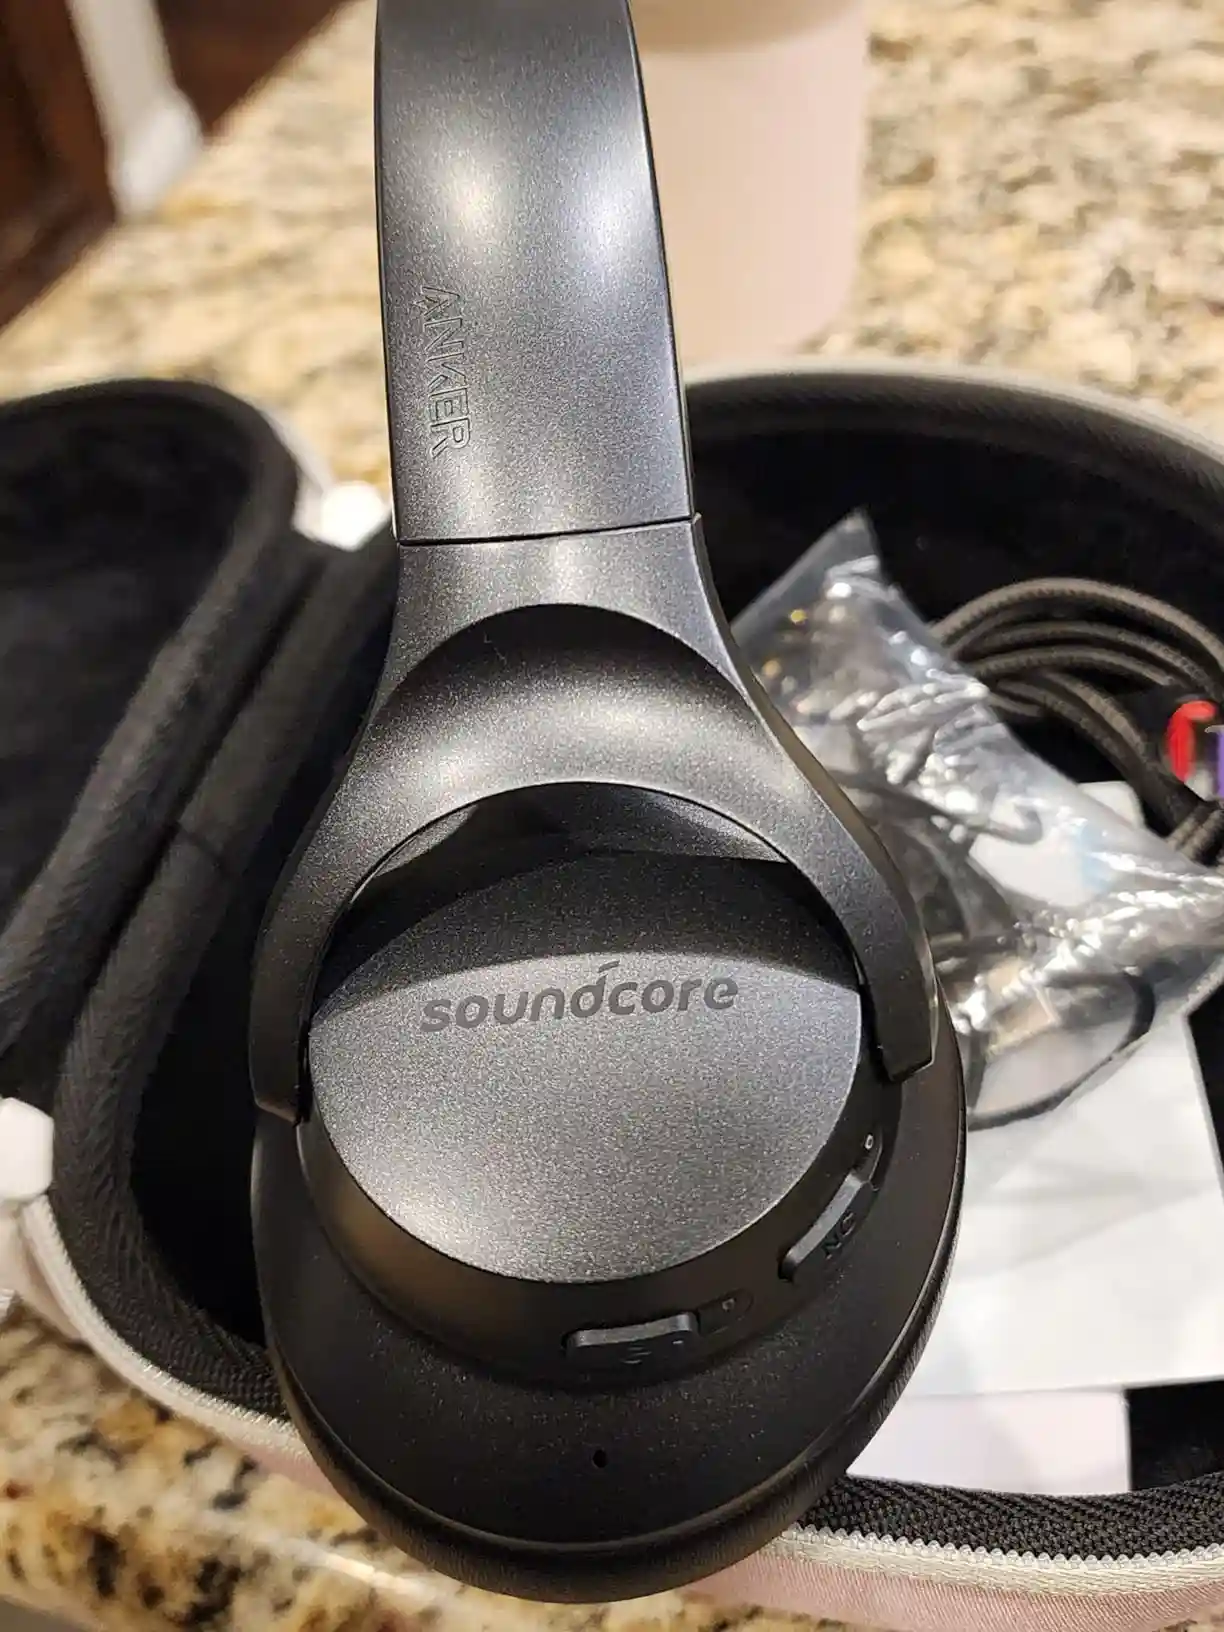 Is the Anker Soundcore Life Q20 good?